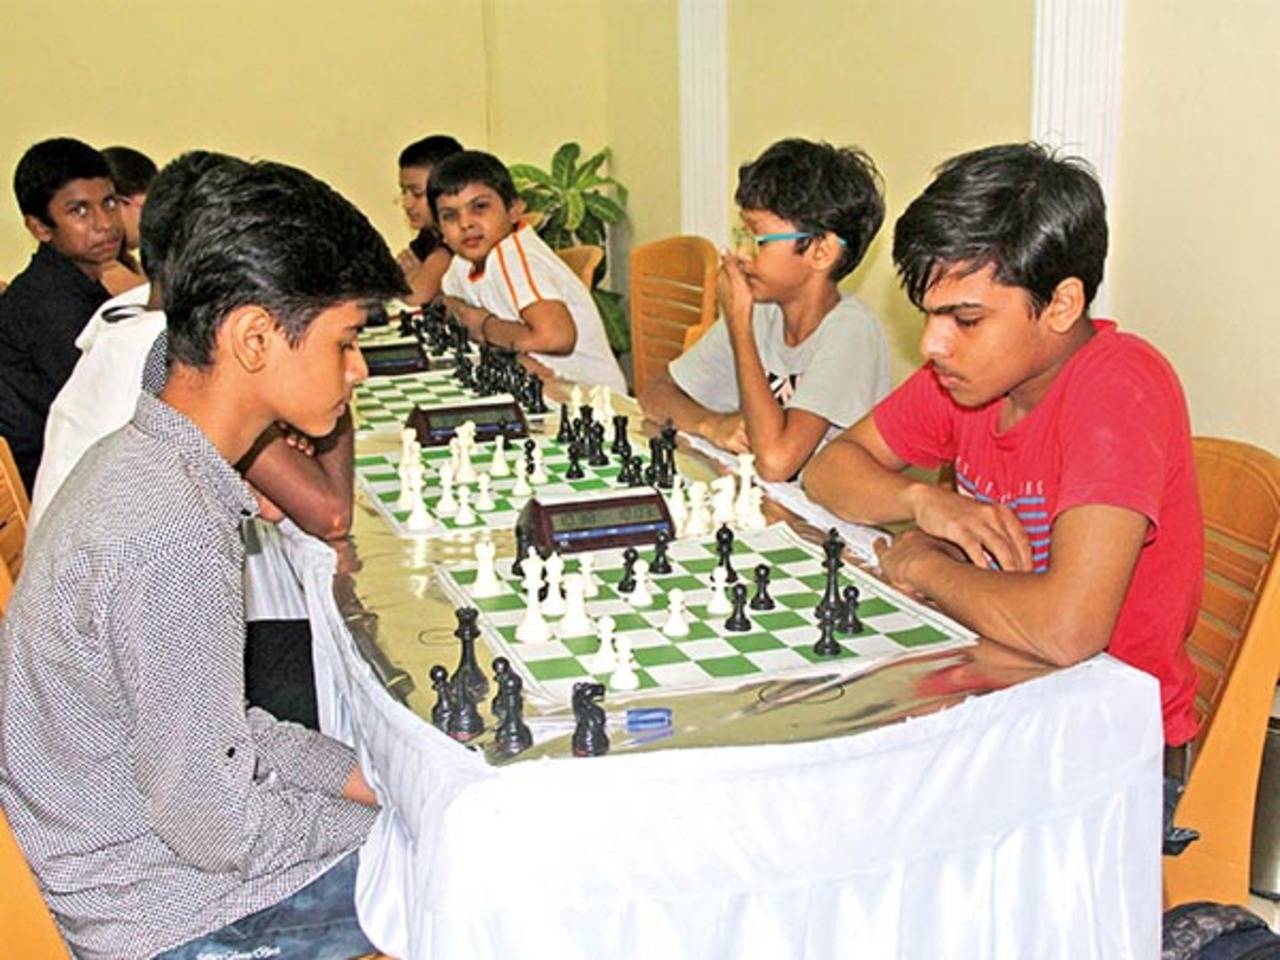 Rs 35,000 Prize Money Chess Tournament hosted by CCBW in Lucknow